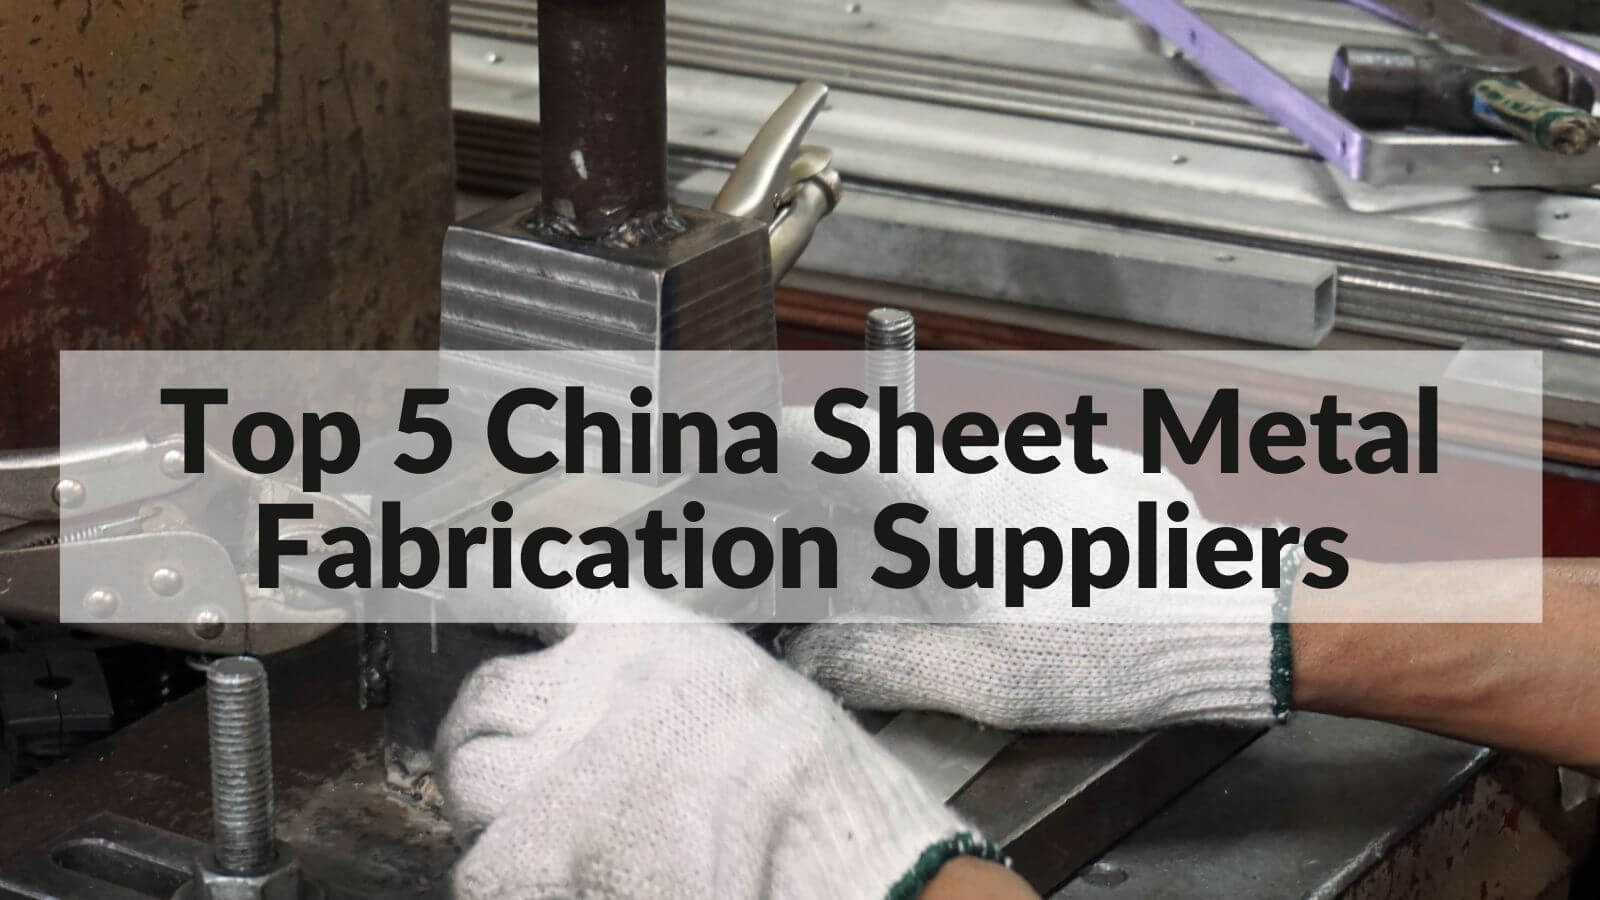 Top 5 China Sheet Metal Fabrication Suppliers in 2022